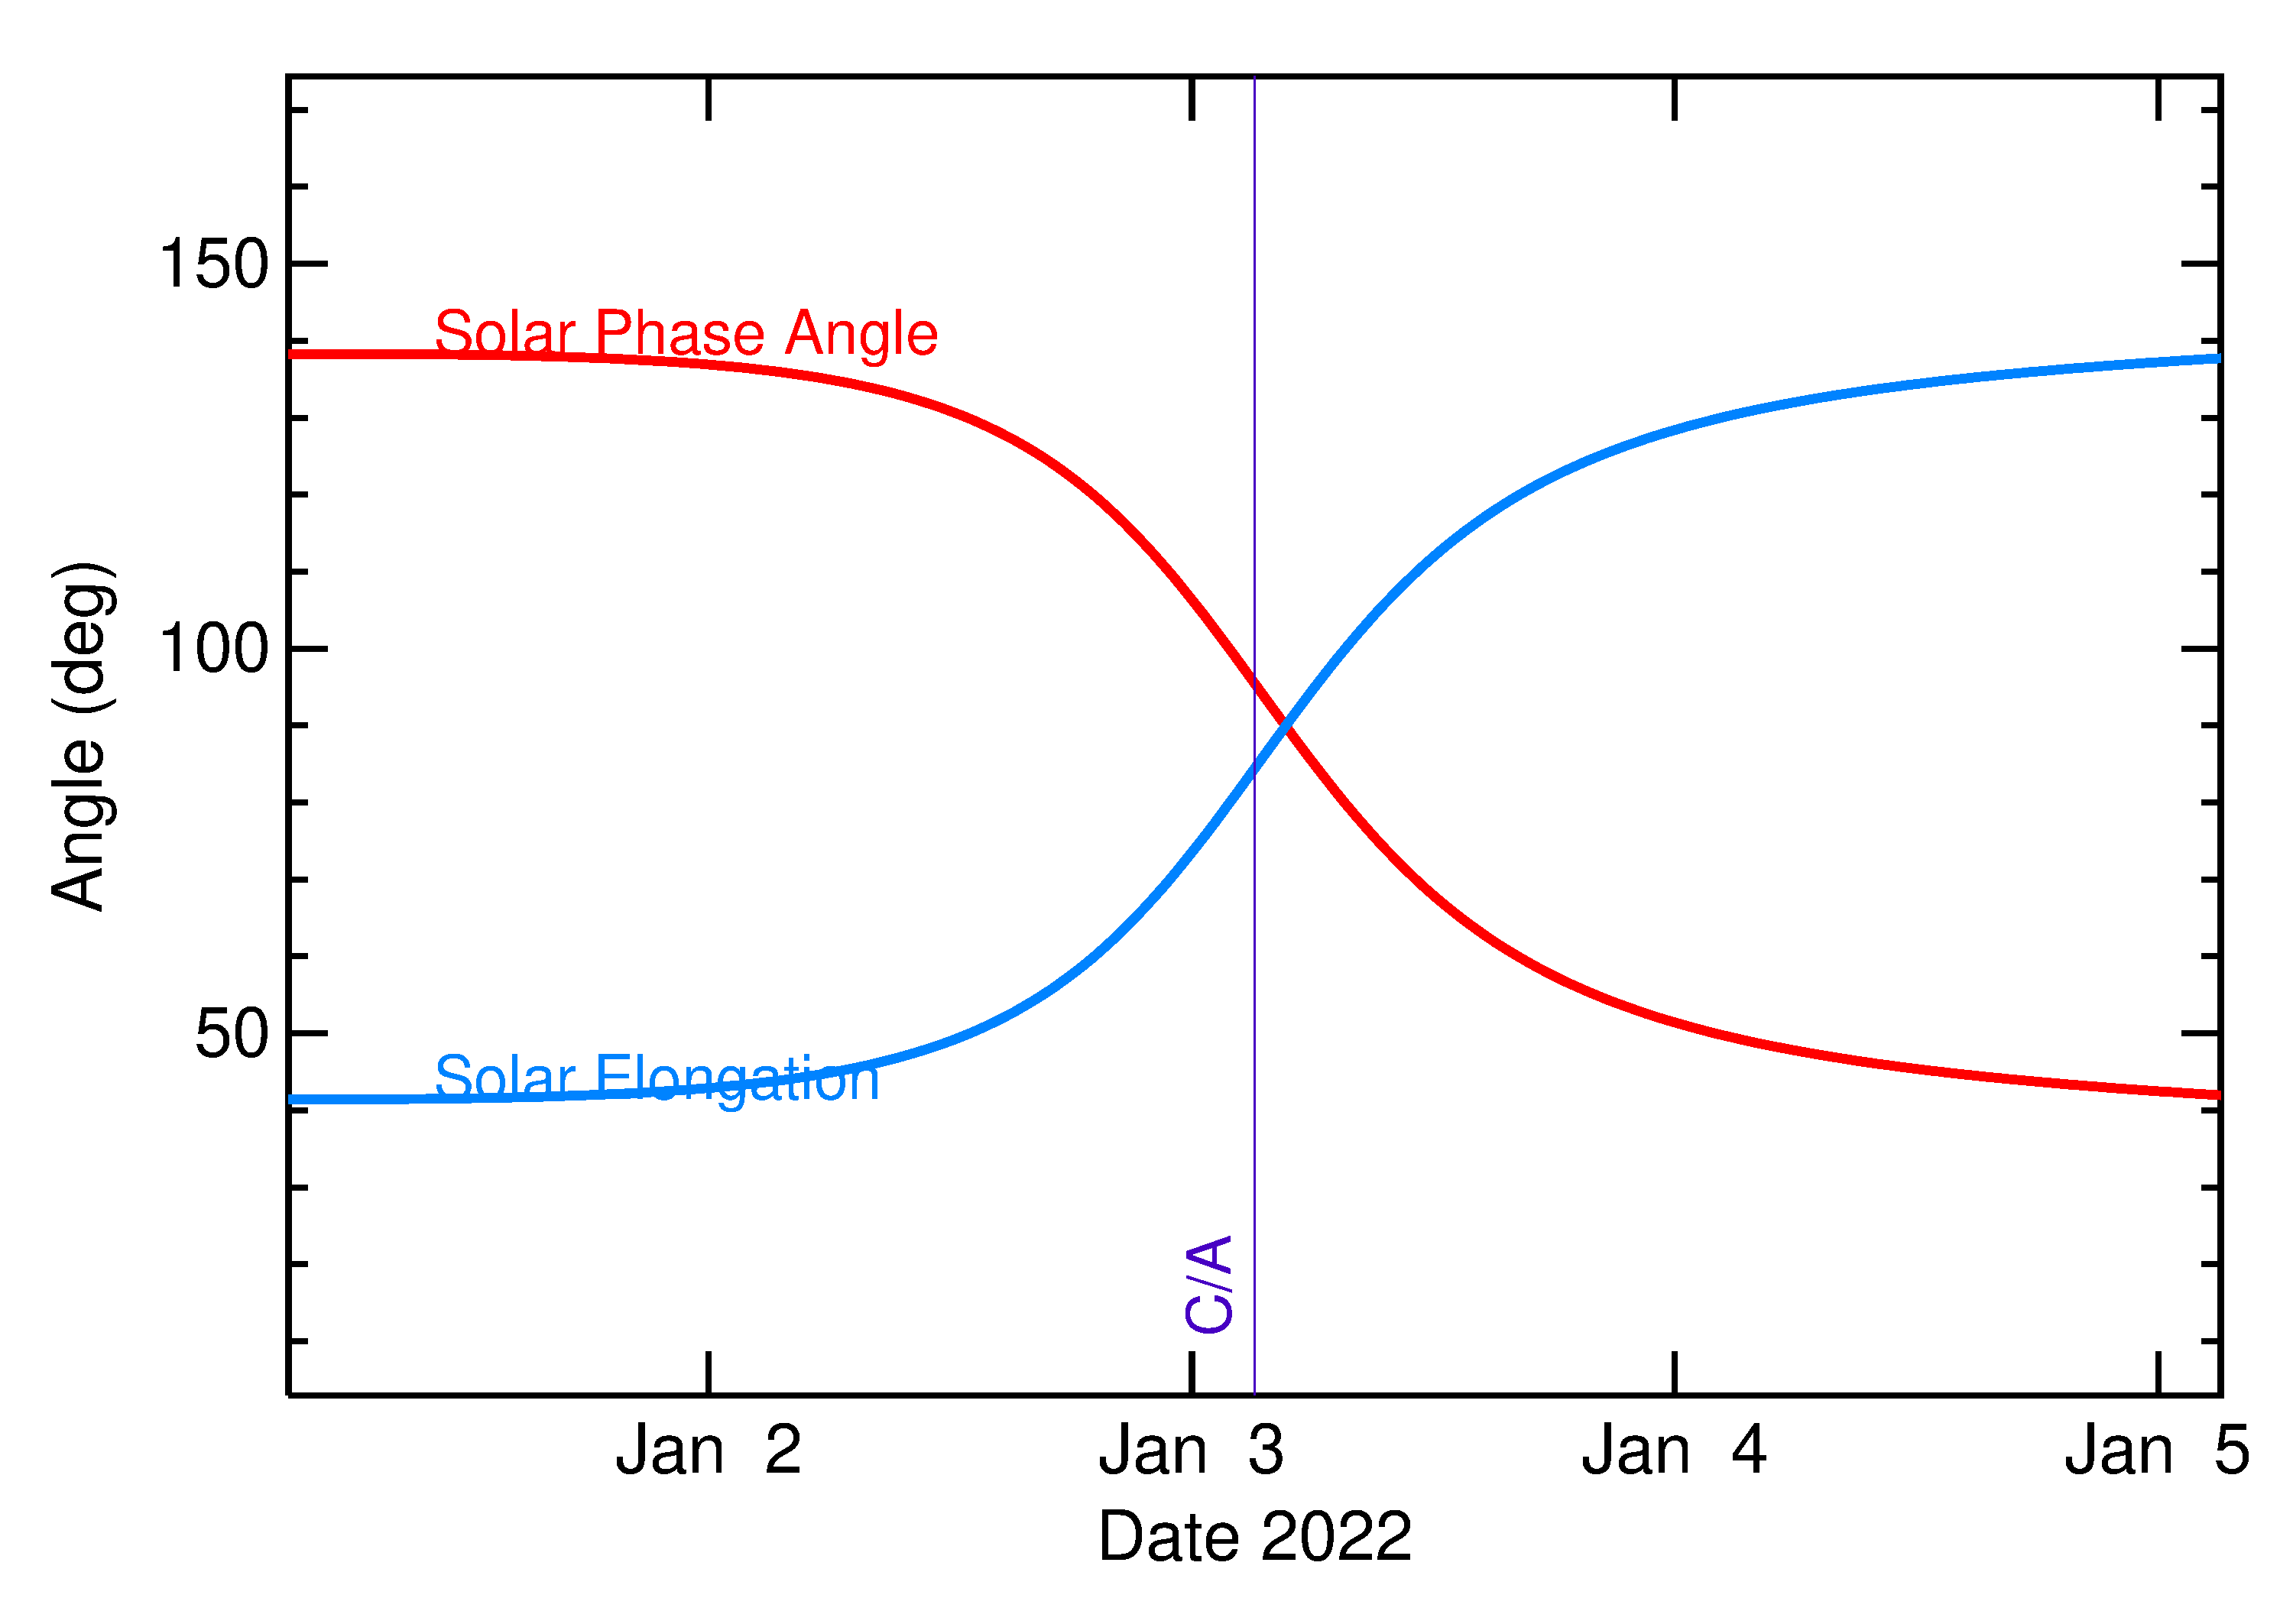 Solar Elongation and Solar Phase Angle of 2022 AU in the days around closest approach